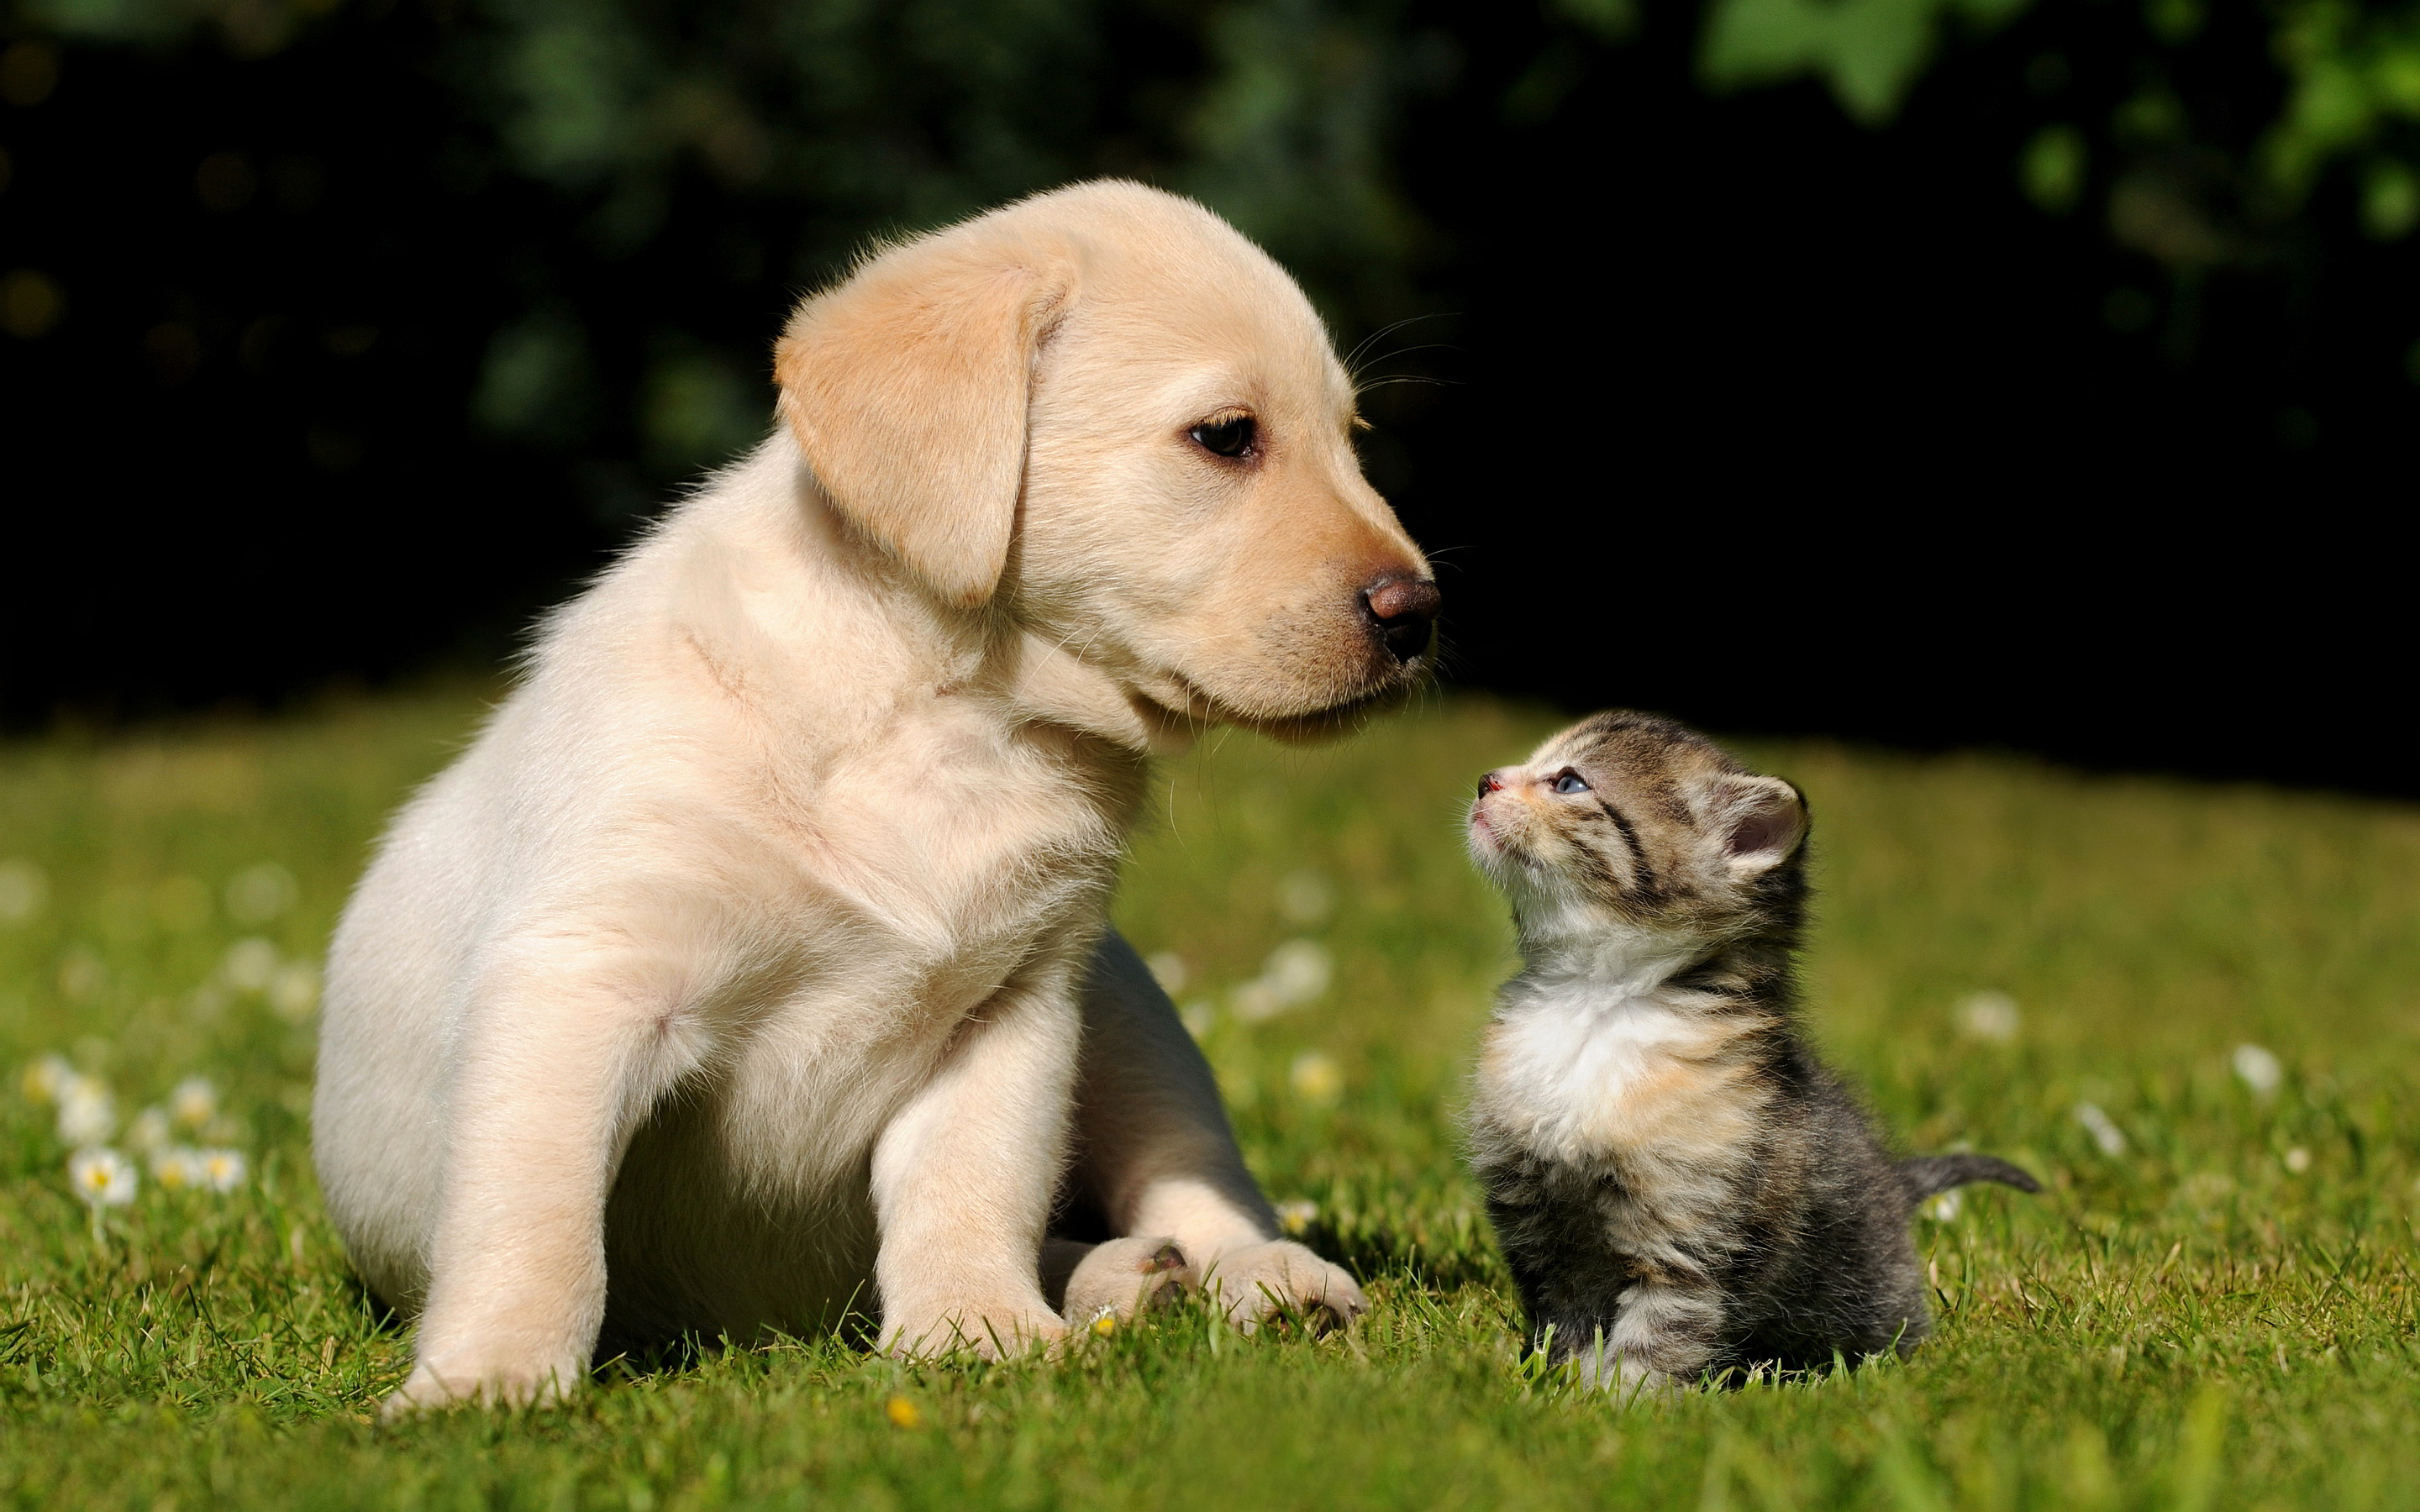 Cute Puppy Kitten Wallpapers Pictures Photos Images. «